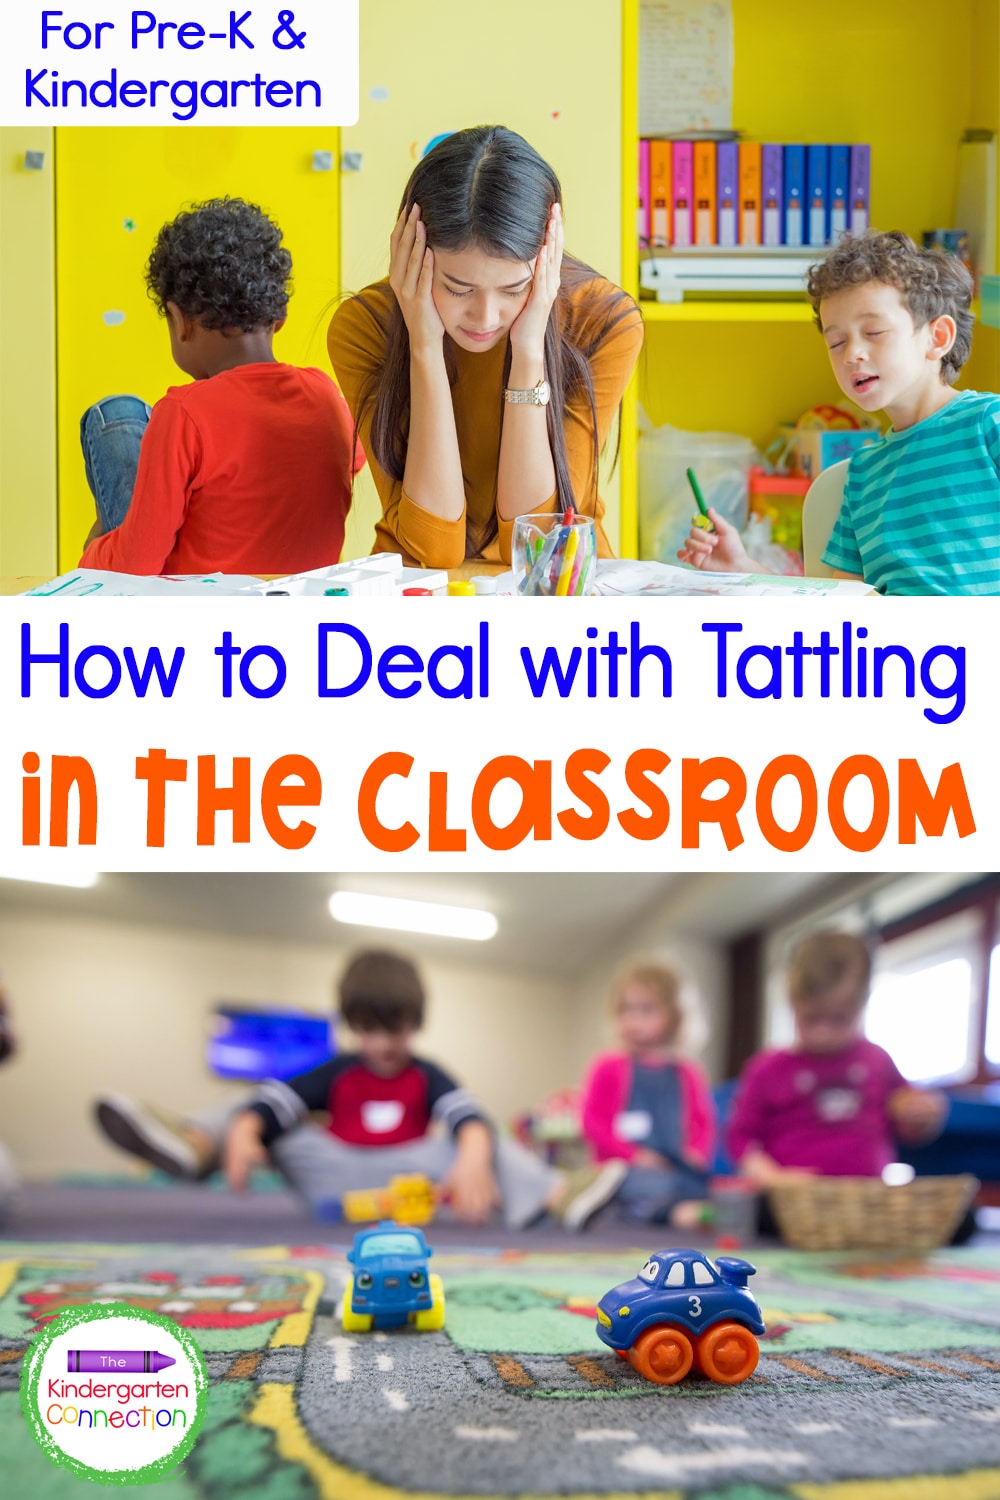 Check out these effective strategies for dealing with tattling in the classroom and help your students build problem-solving skills!